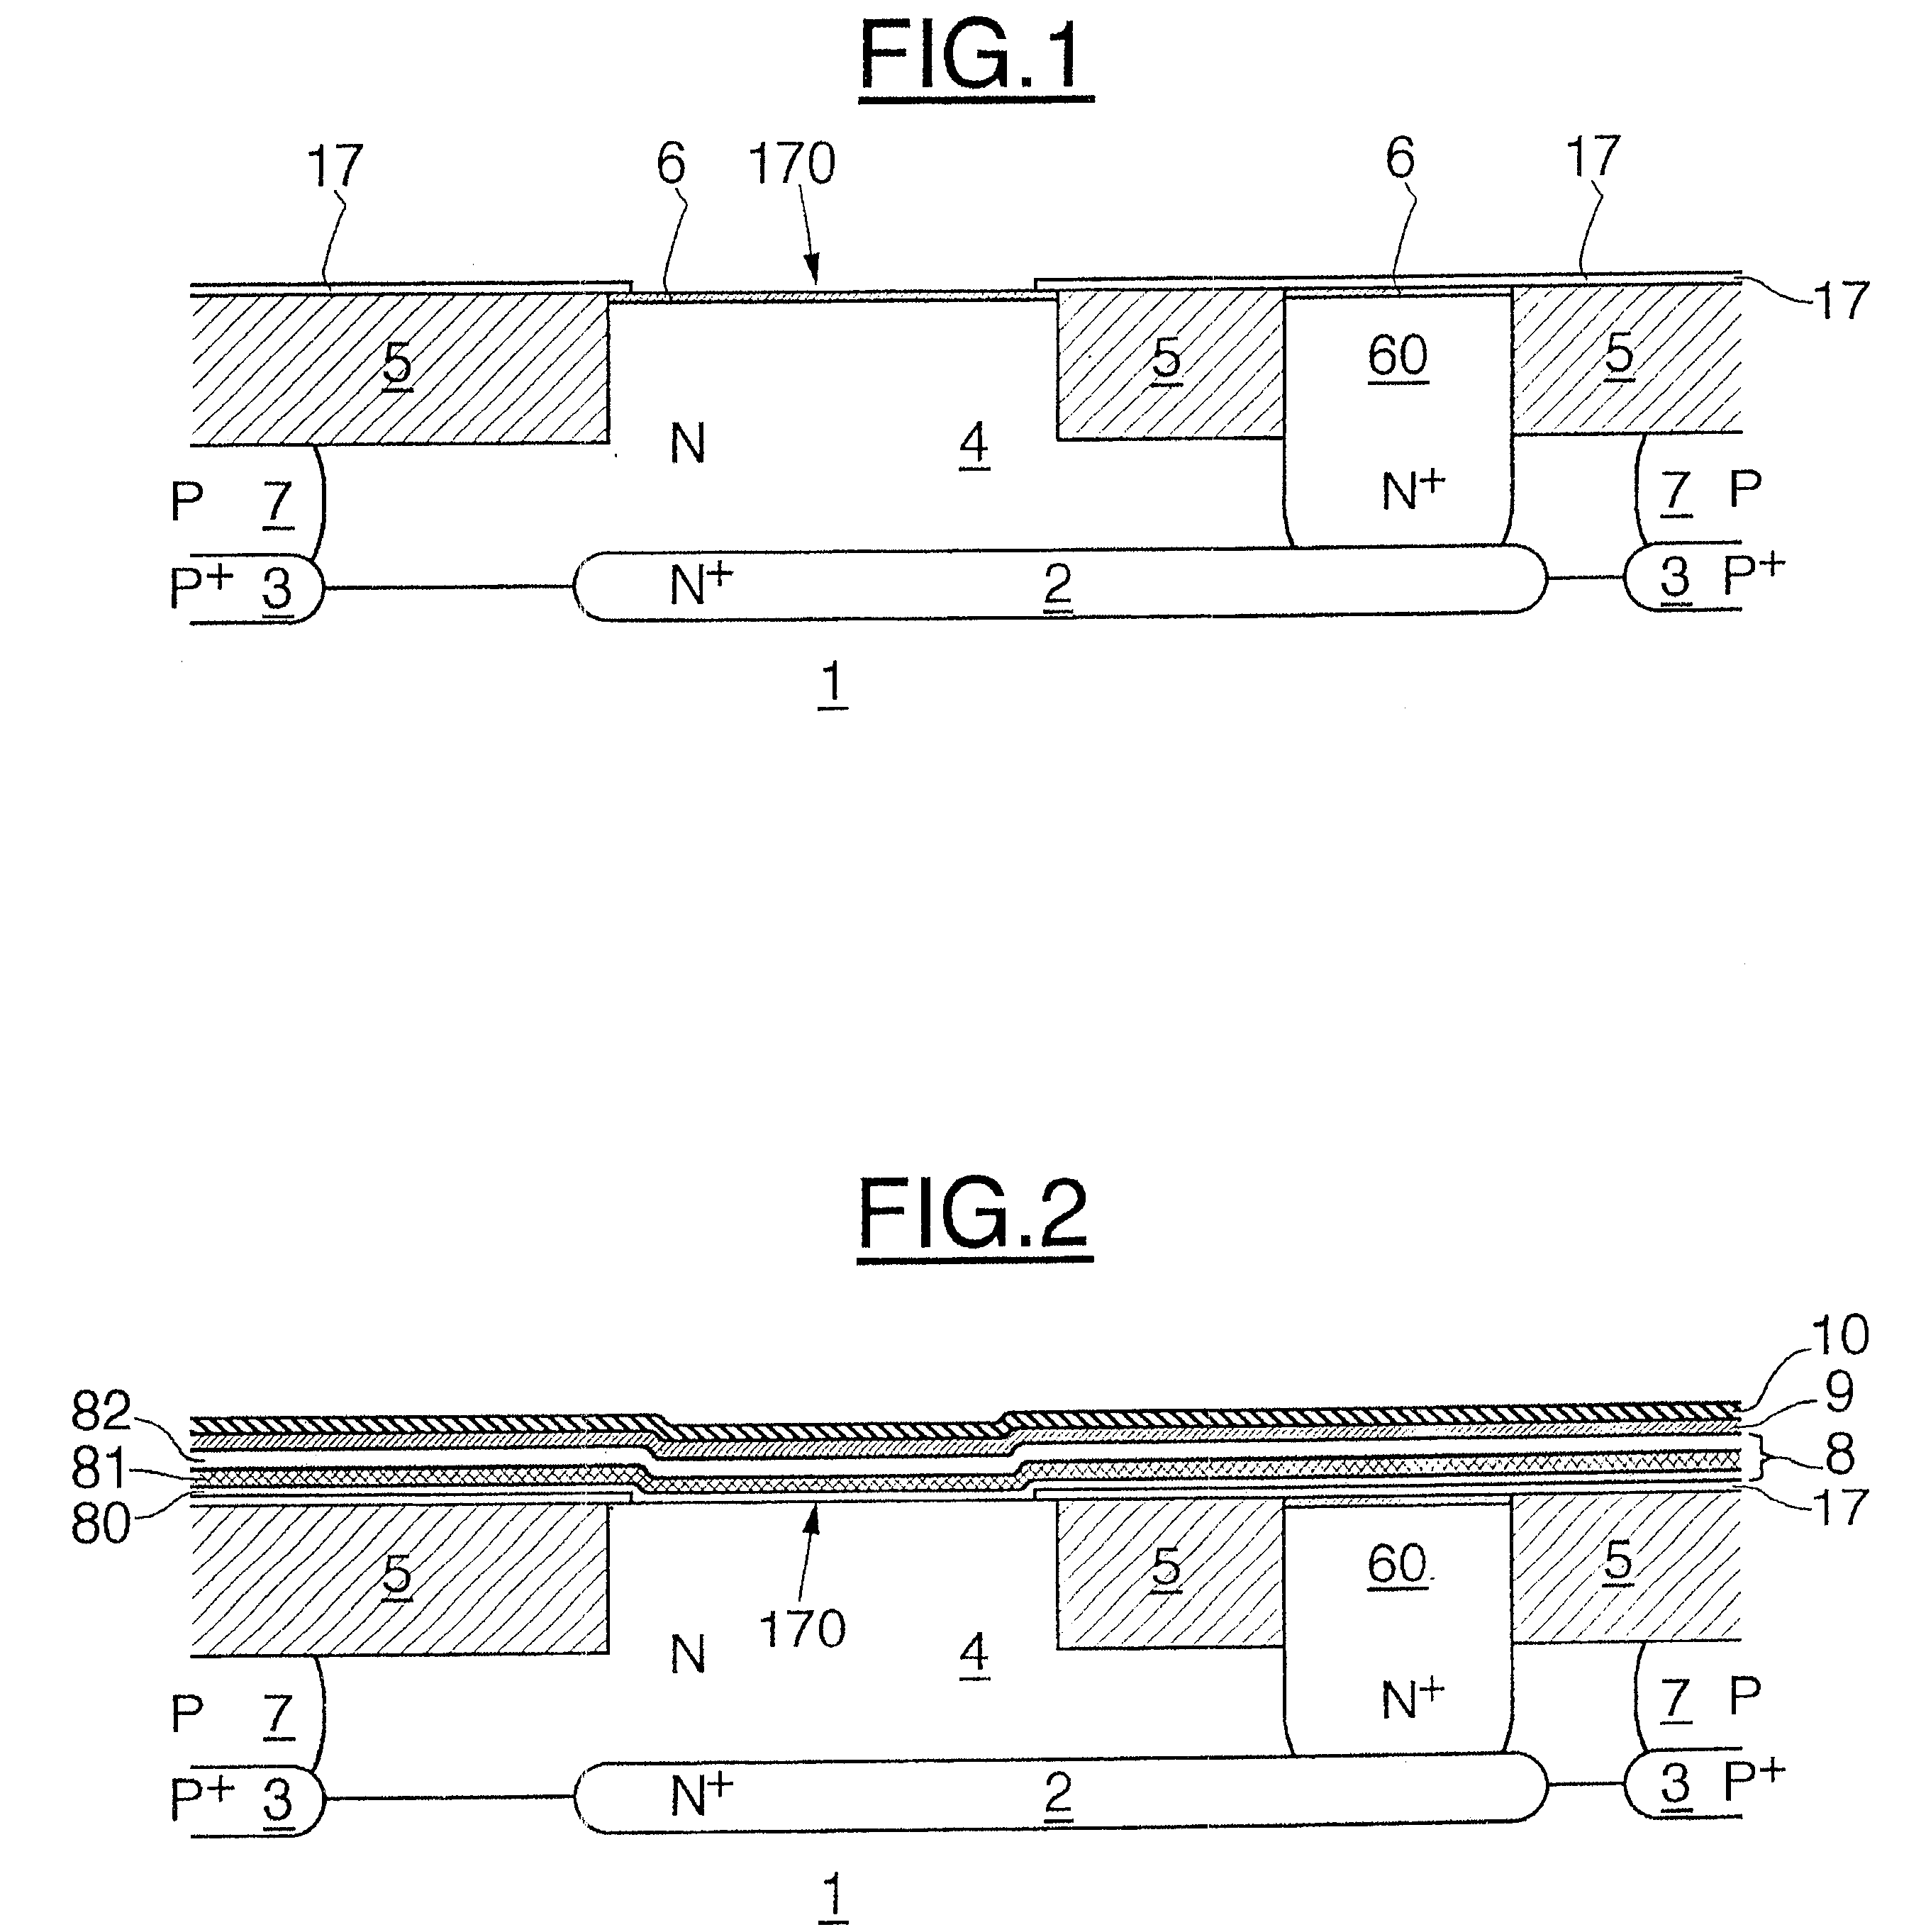 Process for fabricating a self-aligned vertical bipolar transistor